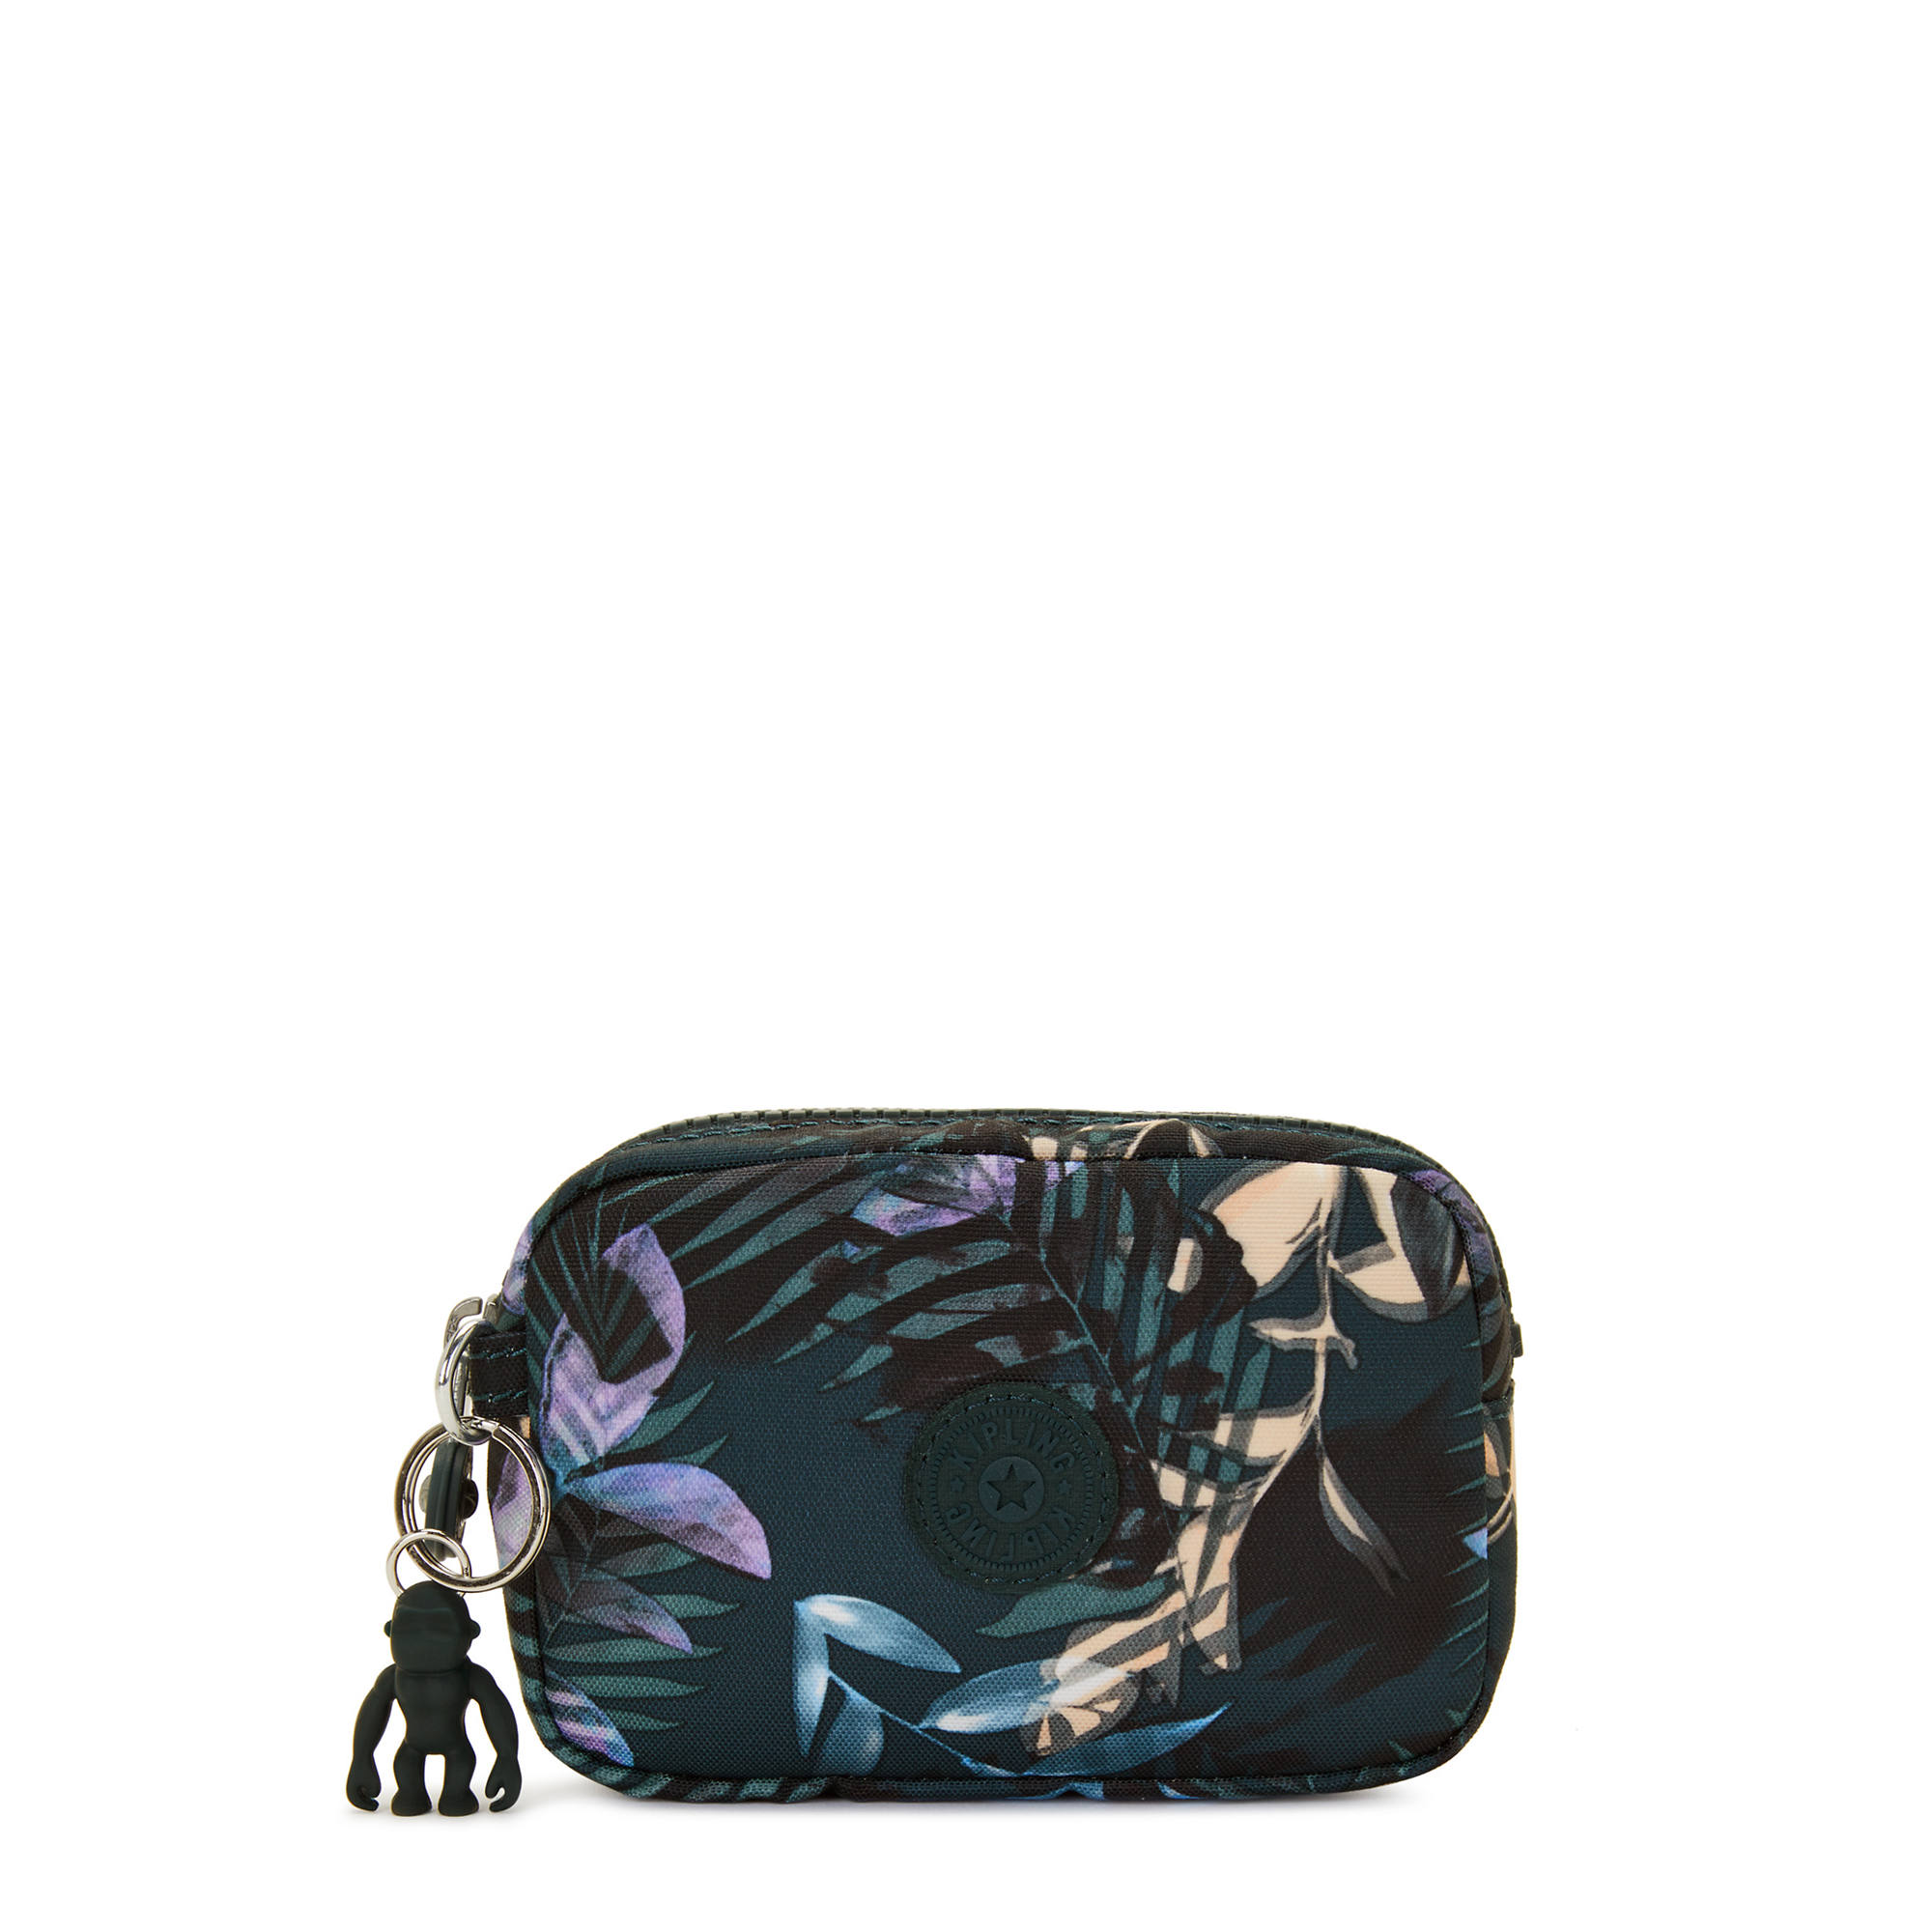 Kipling Gleam Pouch Cosmetic Case Bright Metallic : One Size